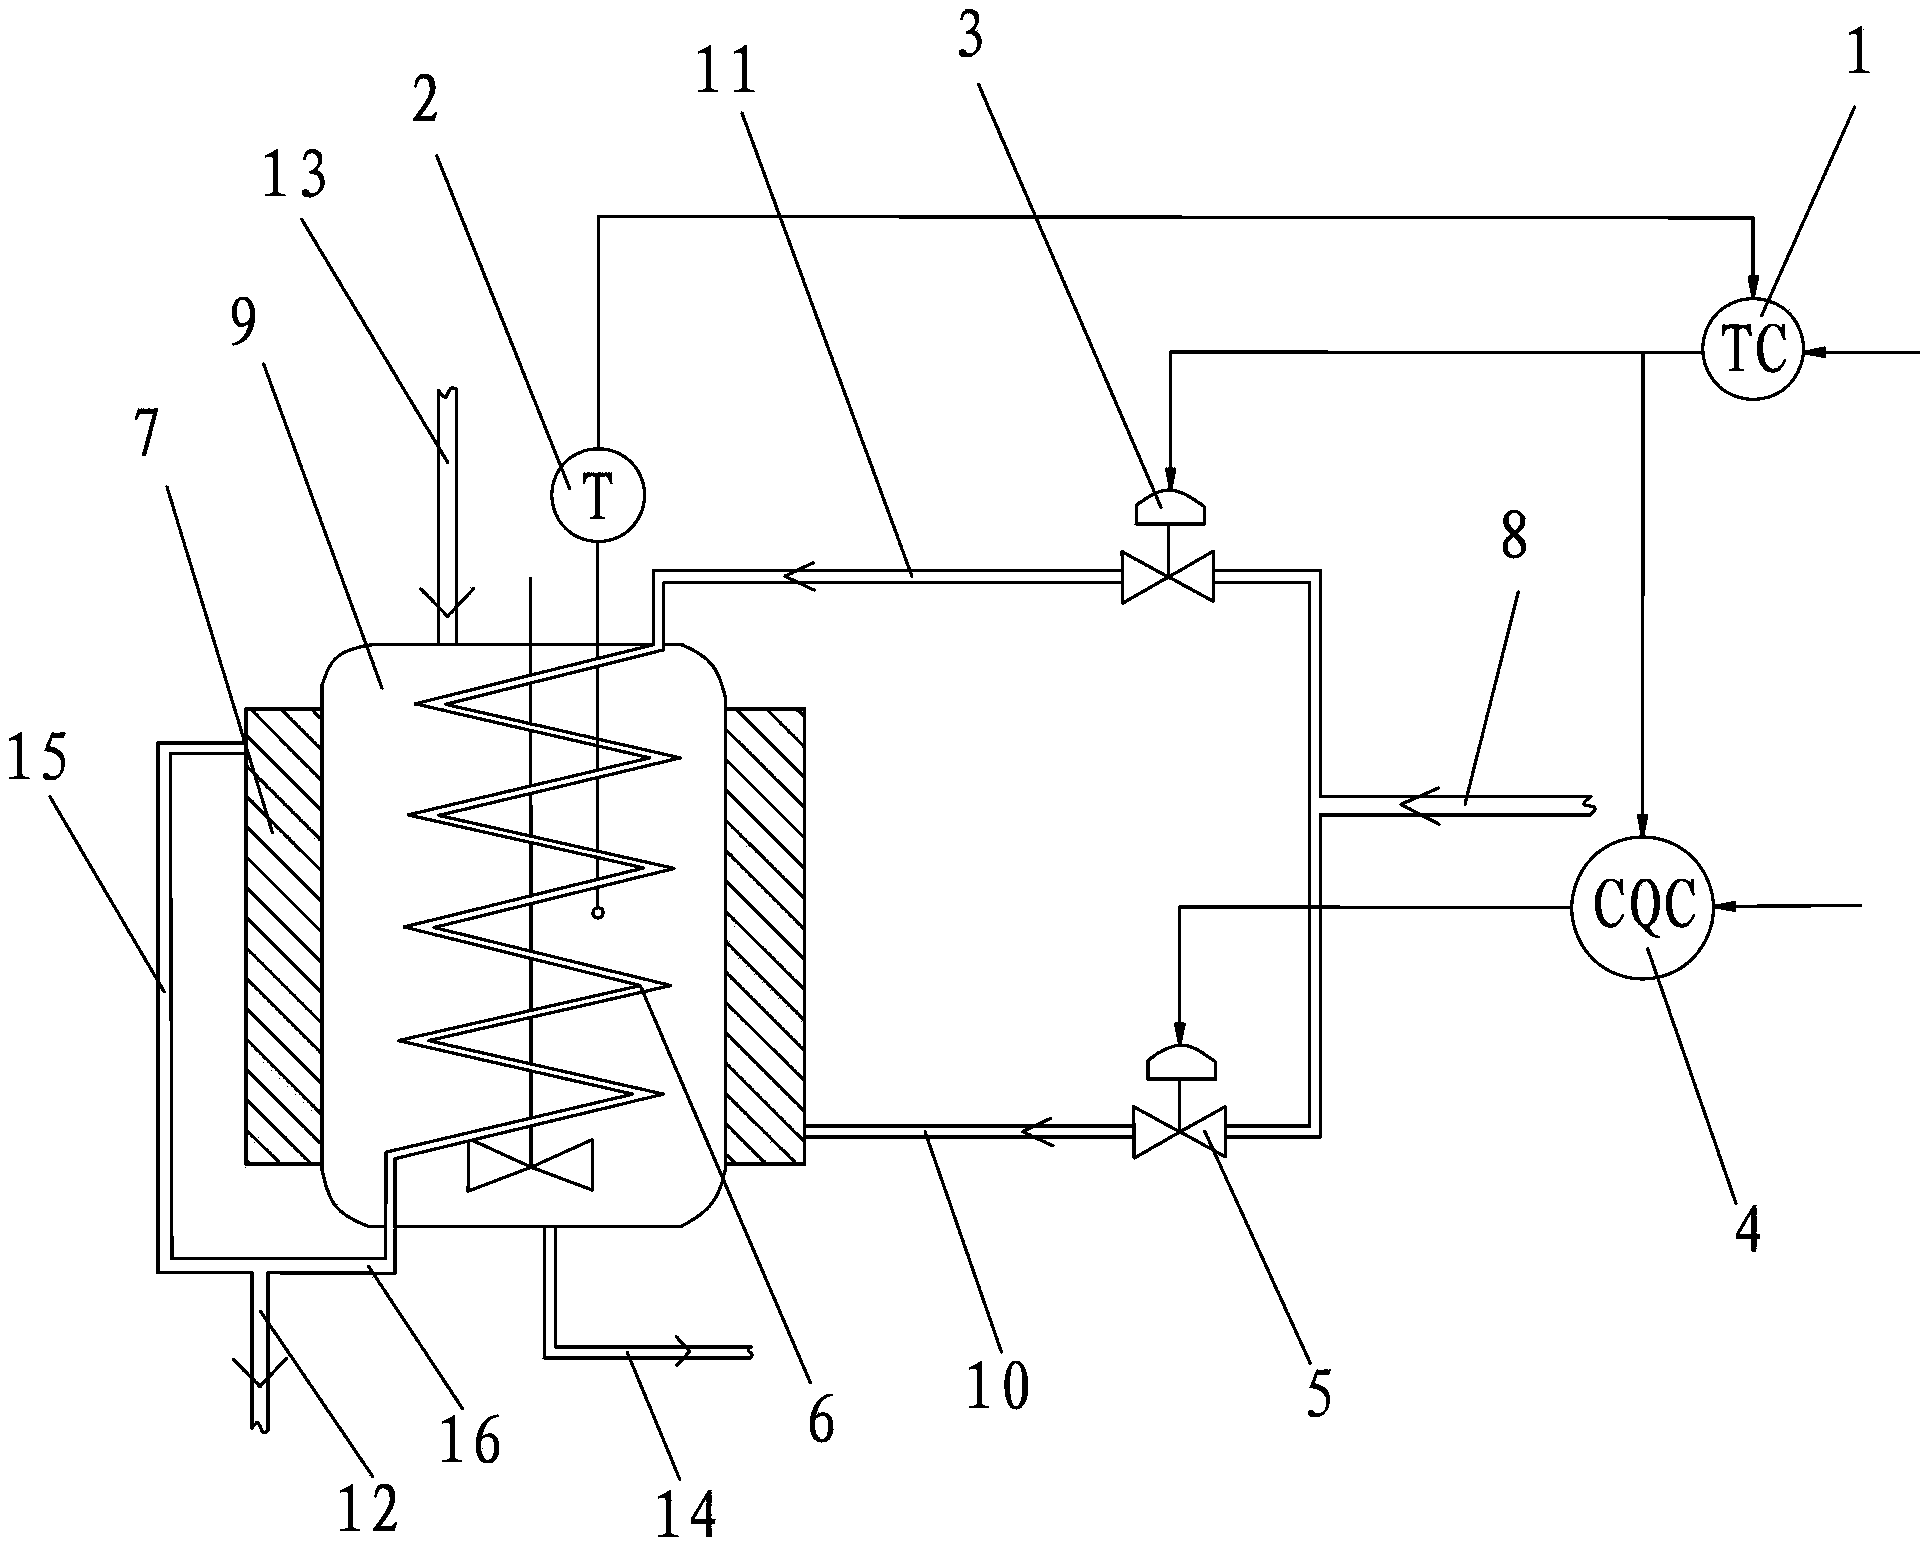 CSTR (continuous stirred-tank reactor) temperature control system and method based on coil heat exchanger and jacketed heat exchanger